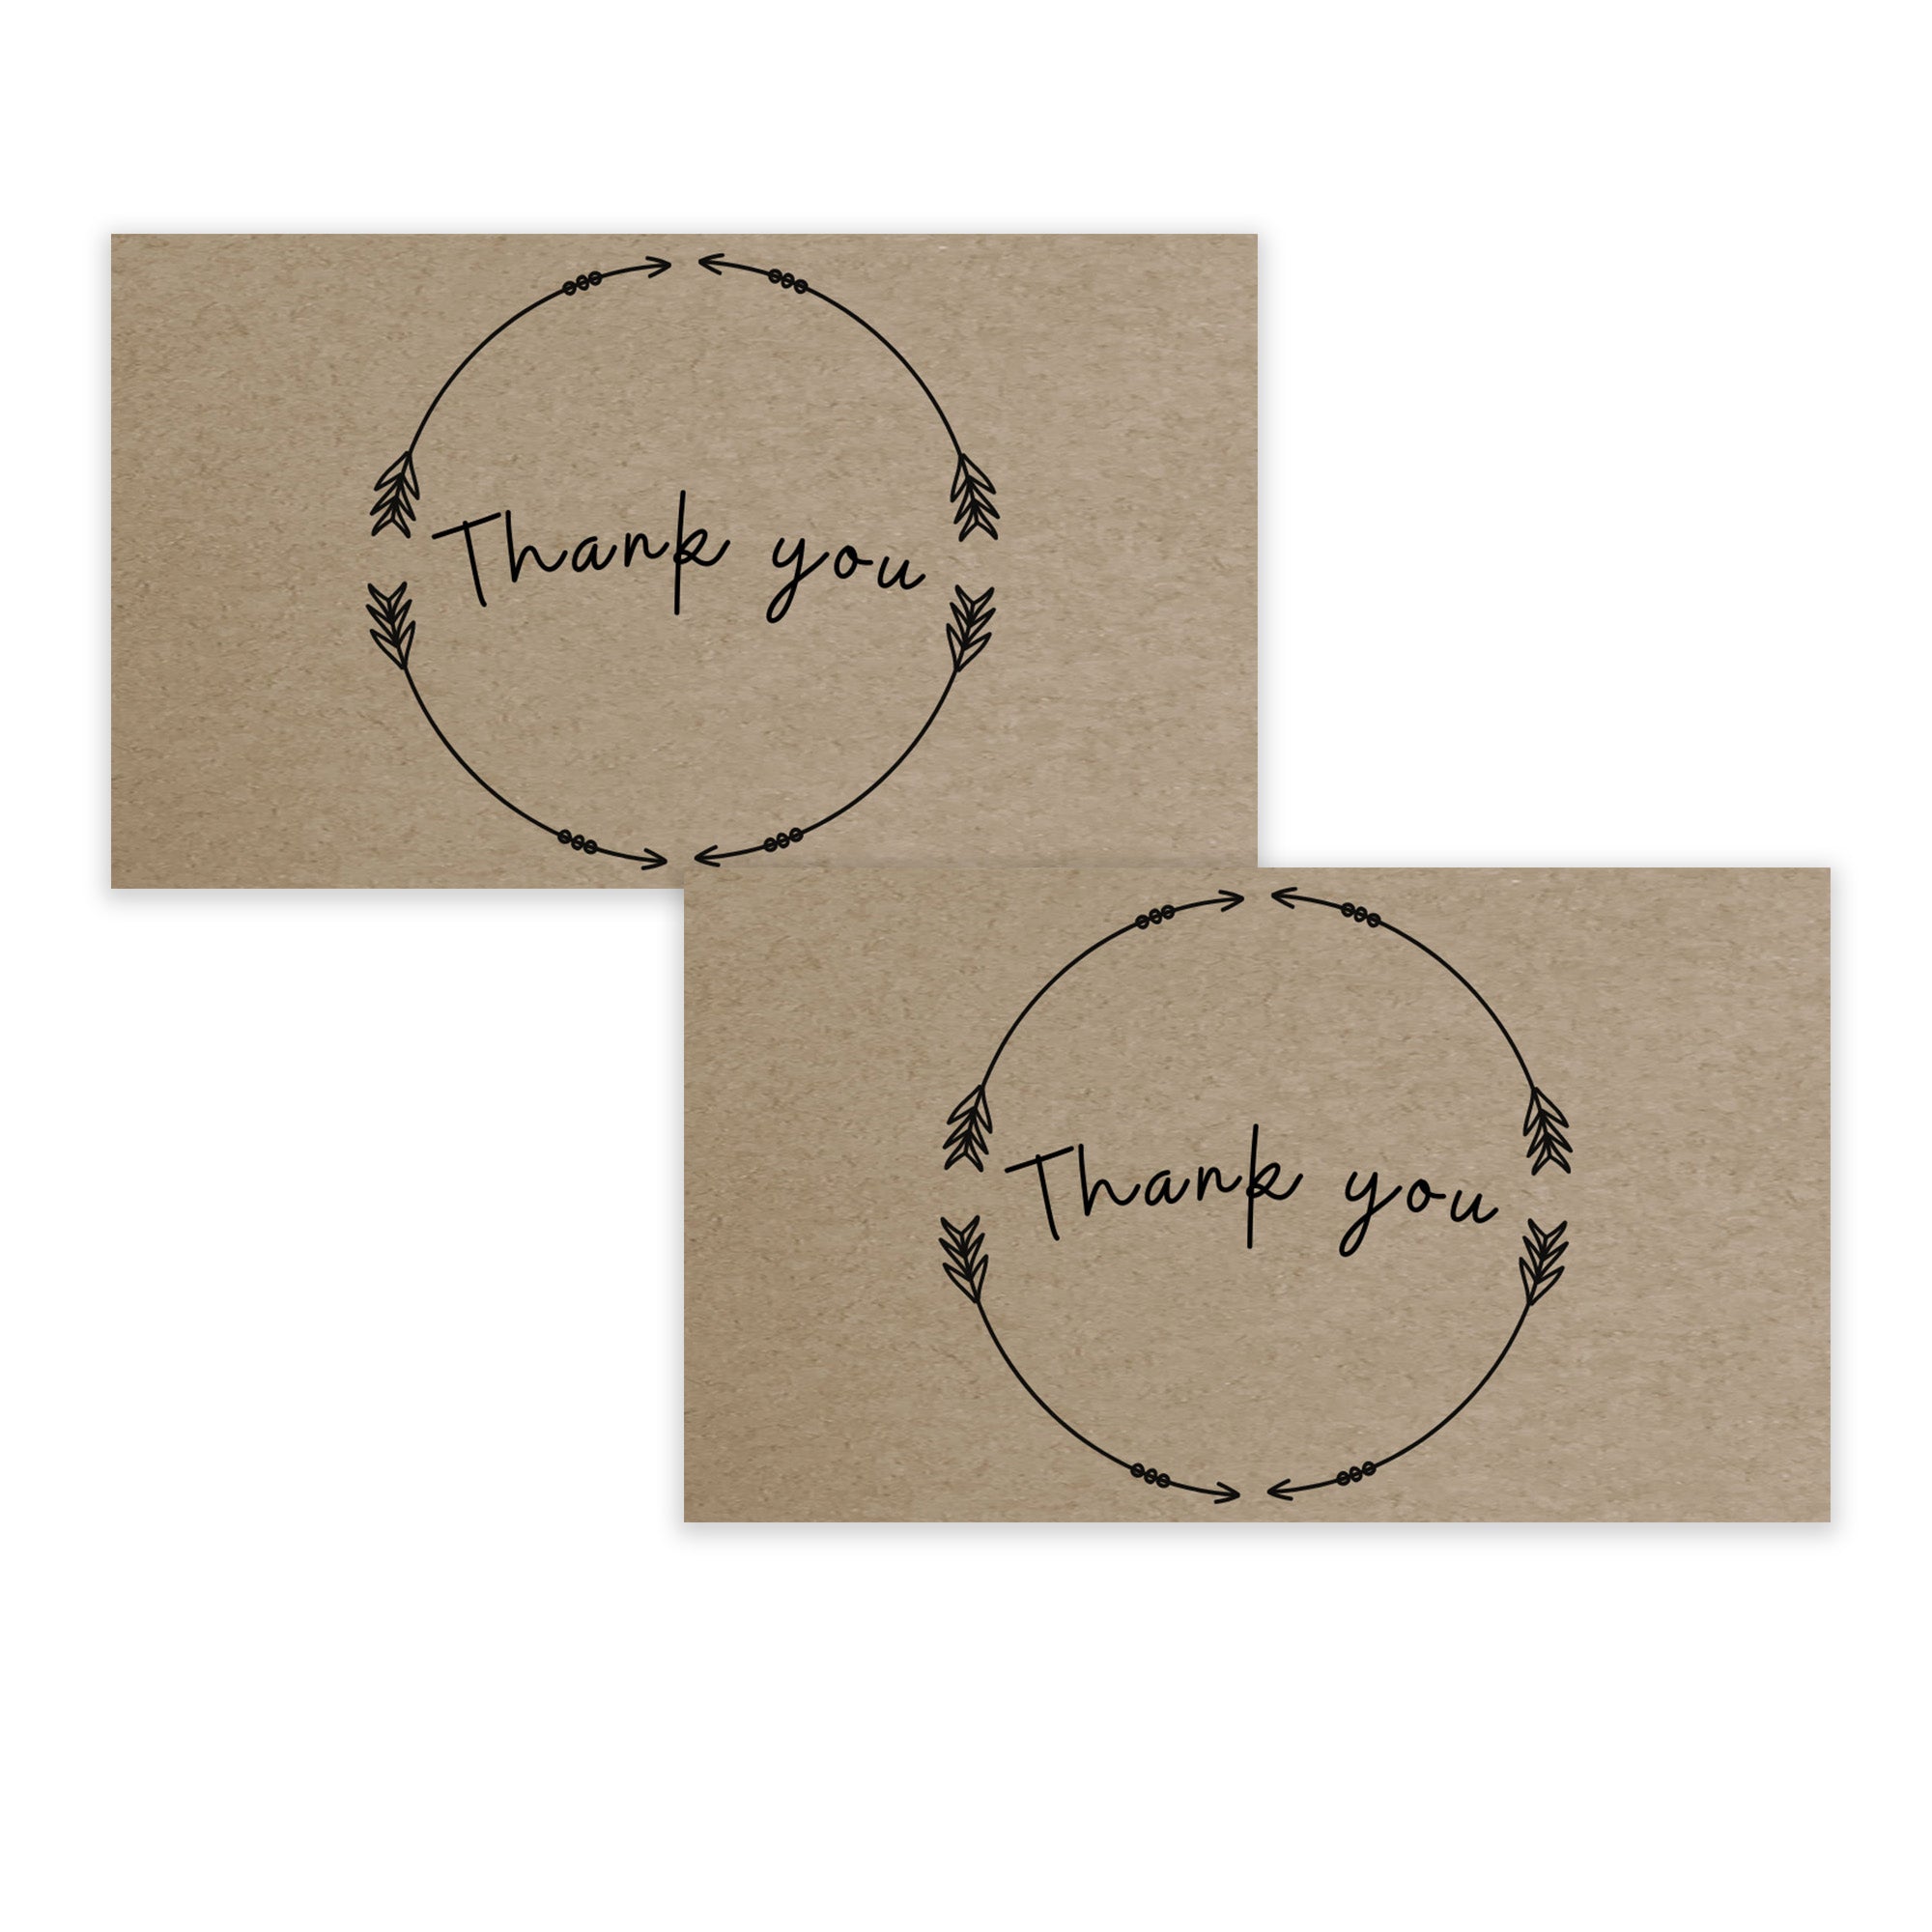 Kraft Business card size thank you cards for your small business -  CutCardStock